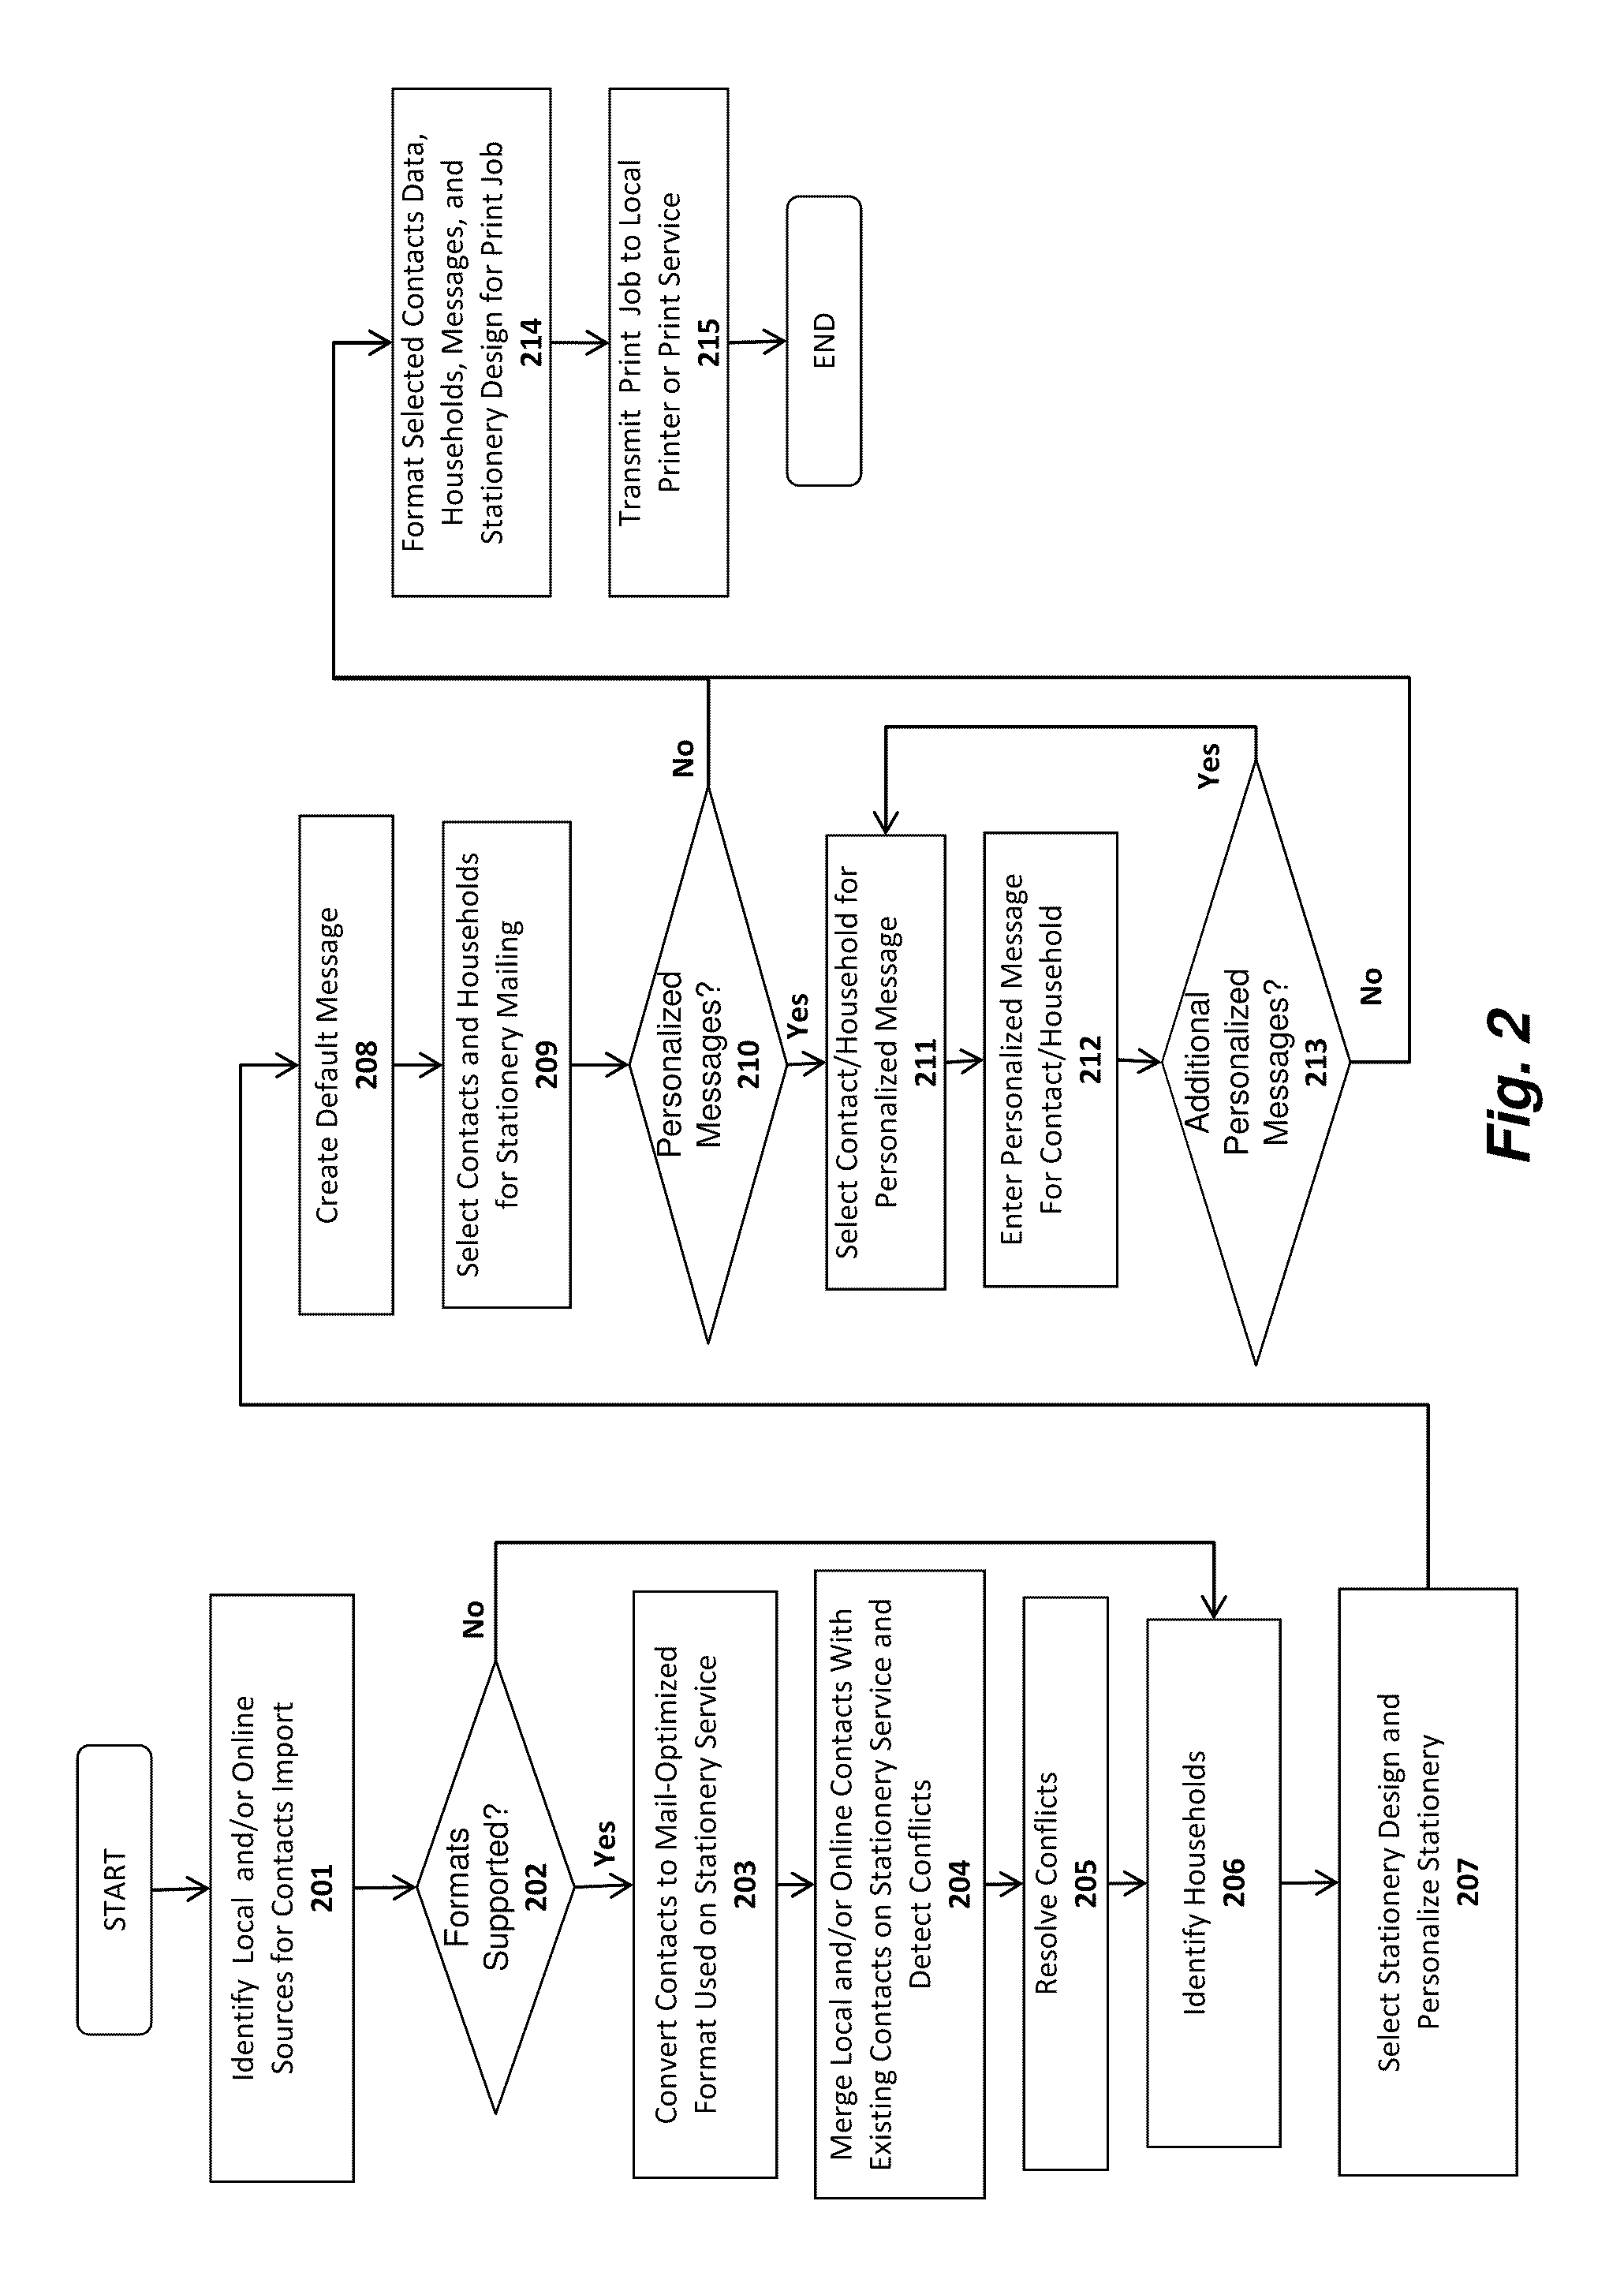 System and method for automatically laying out photos and coloring design elements within a photo story